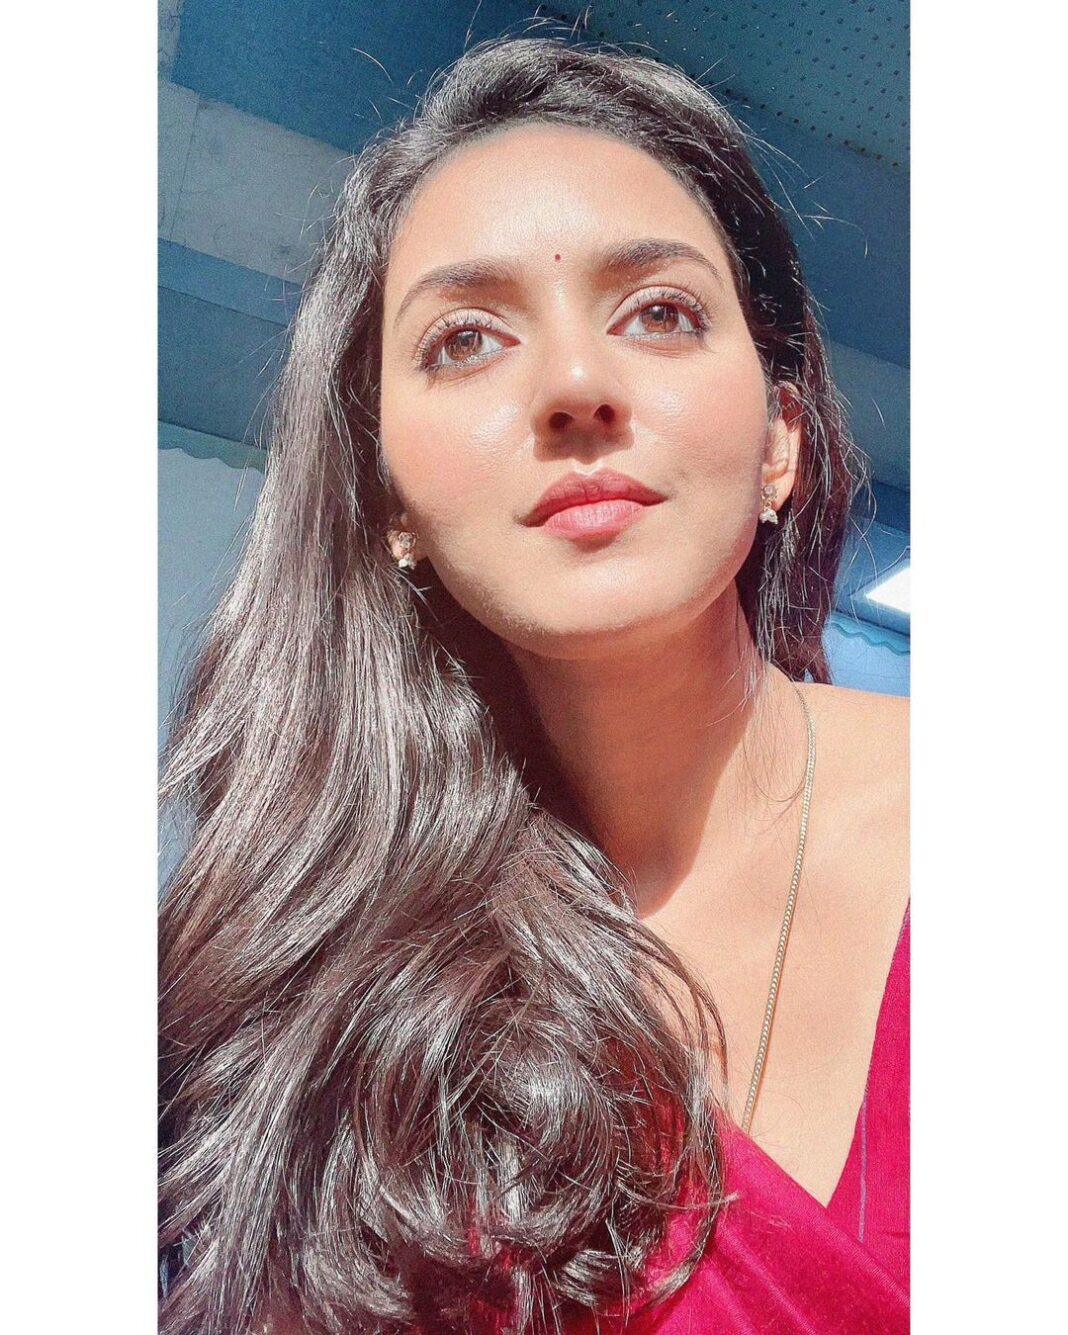 Vidhya Instagram - 🌞“Take a deep breath in, Feel the sun on your soul. Start fresh today, Make peace your goal!” #instaquotes